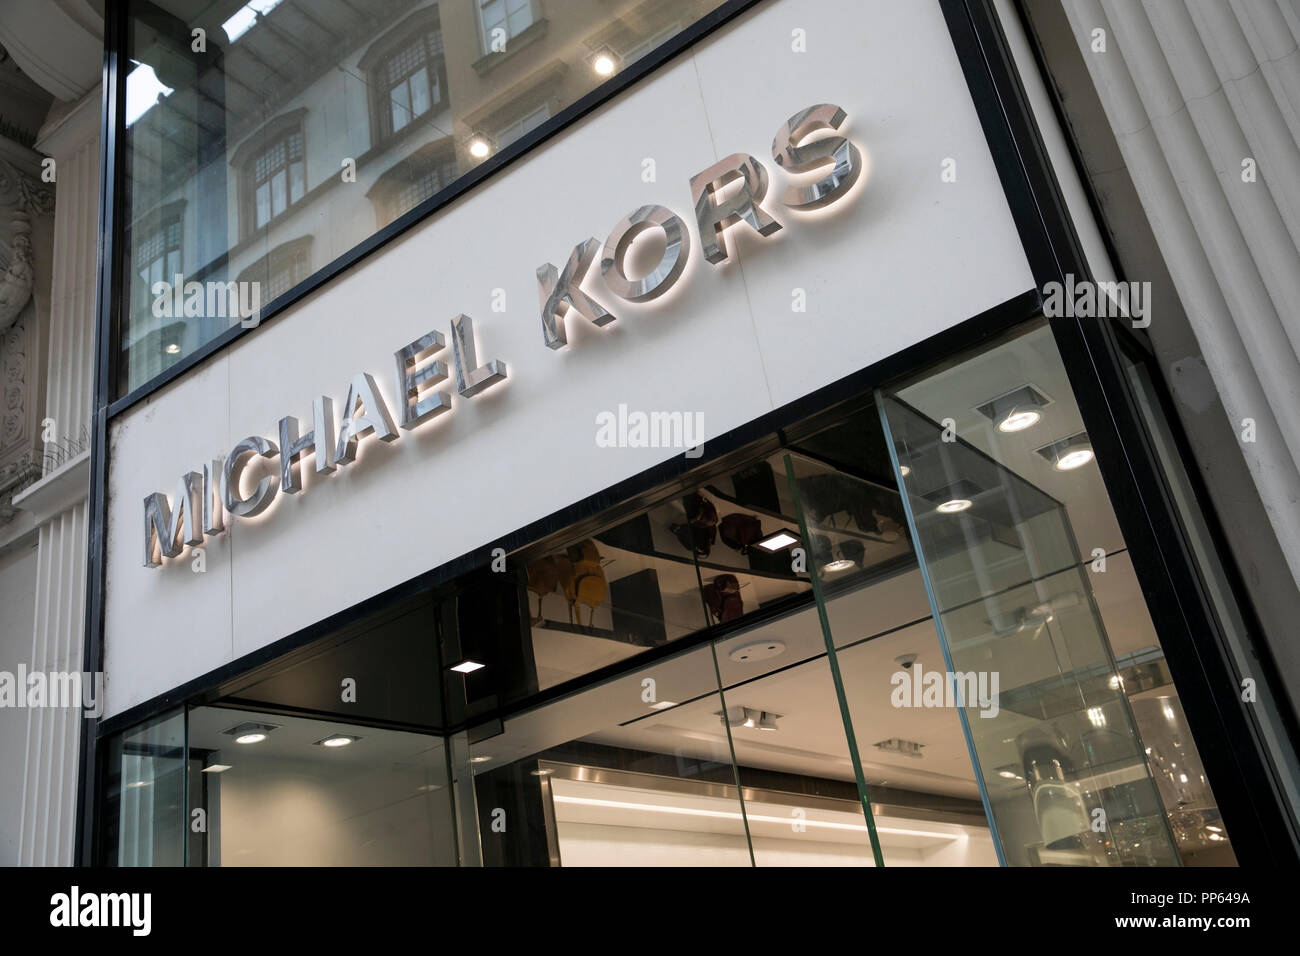 A logo sign outside of a Michael Kors retail store in Vienna, Austria, on  September 4, 2018 Stock Photo - Alamy